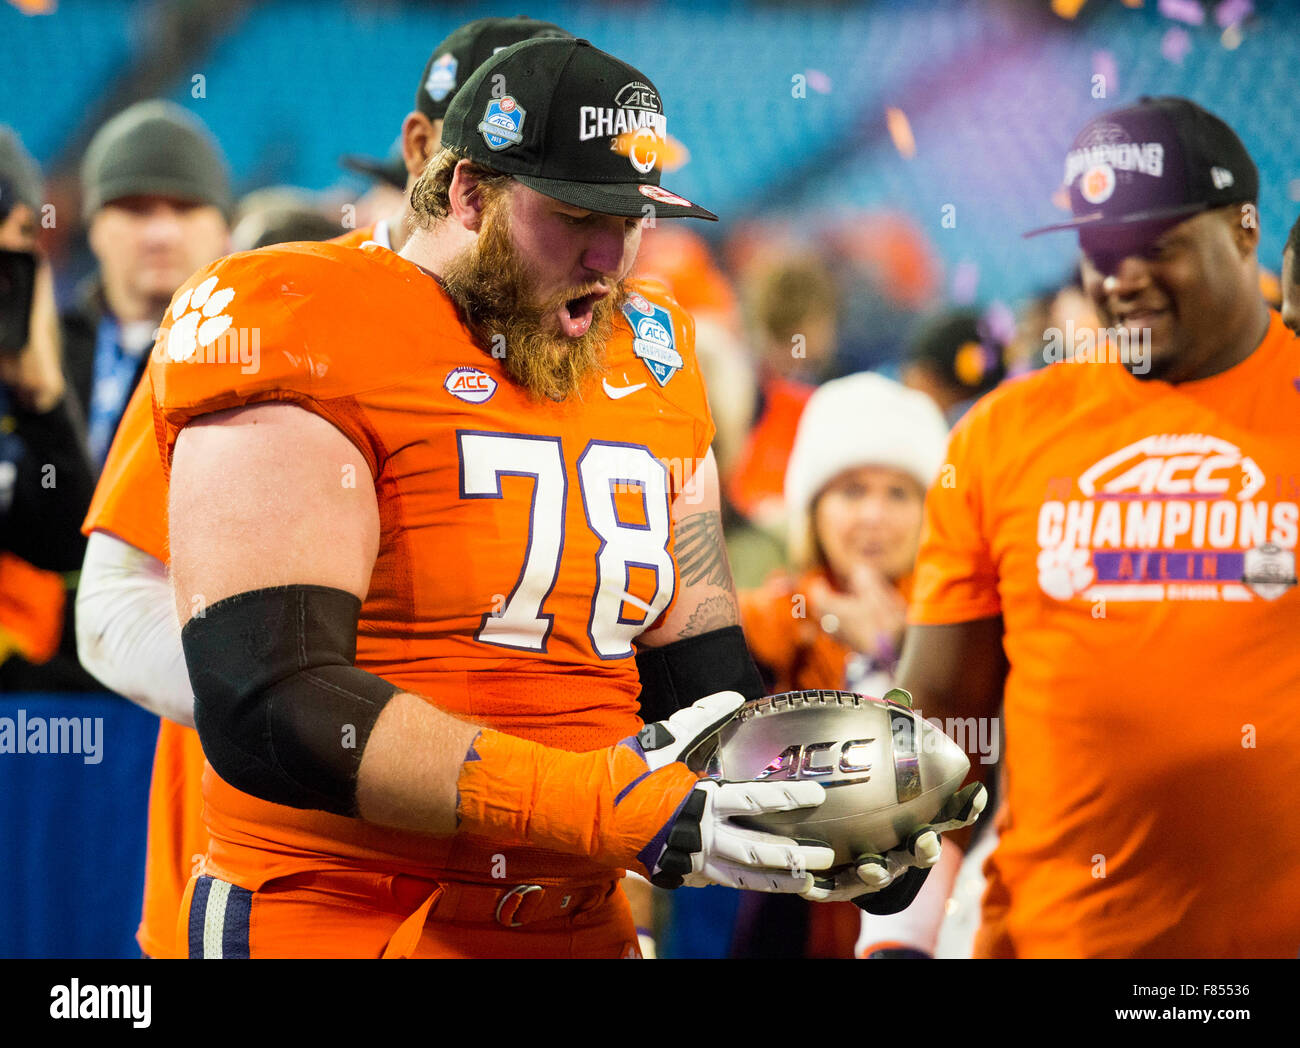 Clemson offensive lineman Eric Mac Lain (78) holds the trophy after the ACC College Football Championship game between North Carolina and Clemson on Saturday Dec. 5, 2015 at Bank of America Stadium, in Charlotte, NC. Jacob Kupferman/CSM Stock Photo